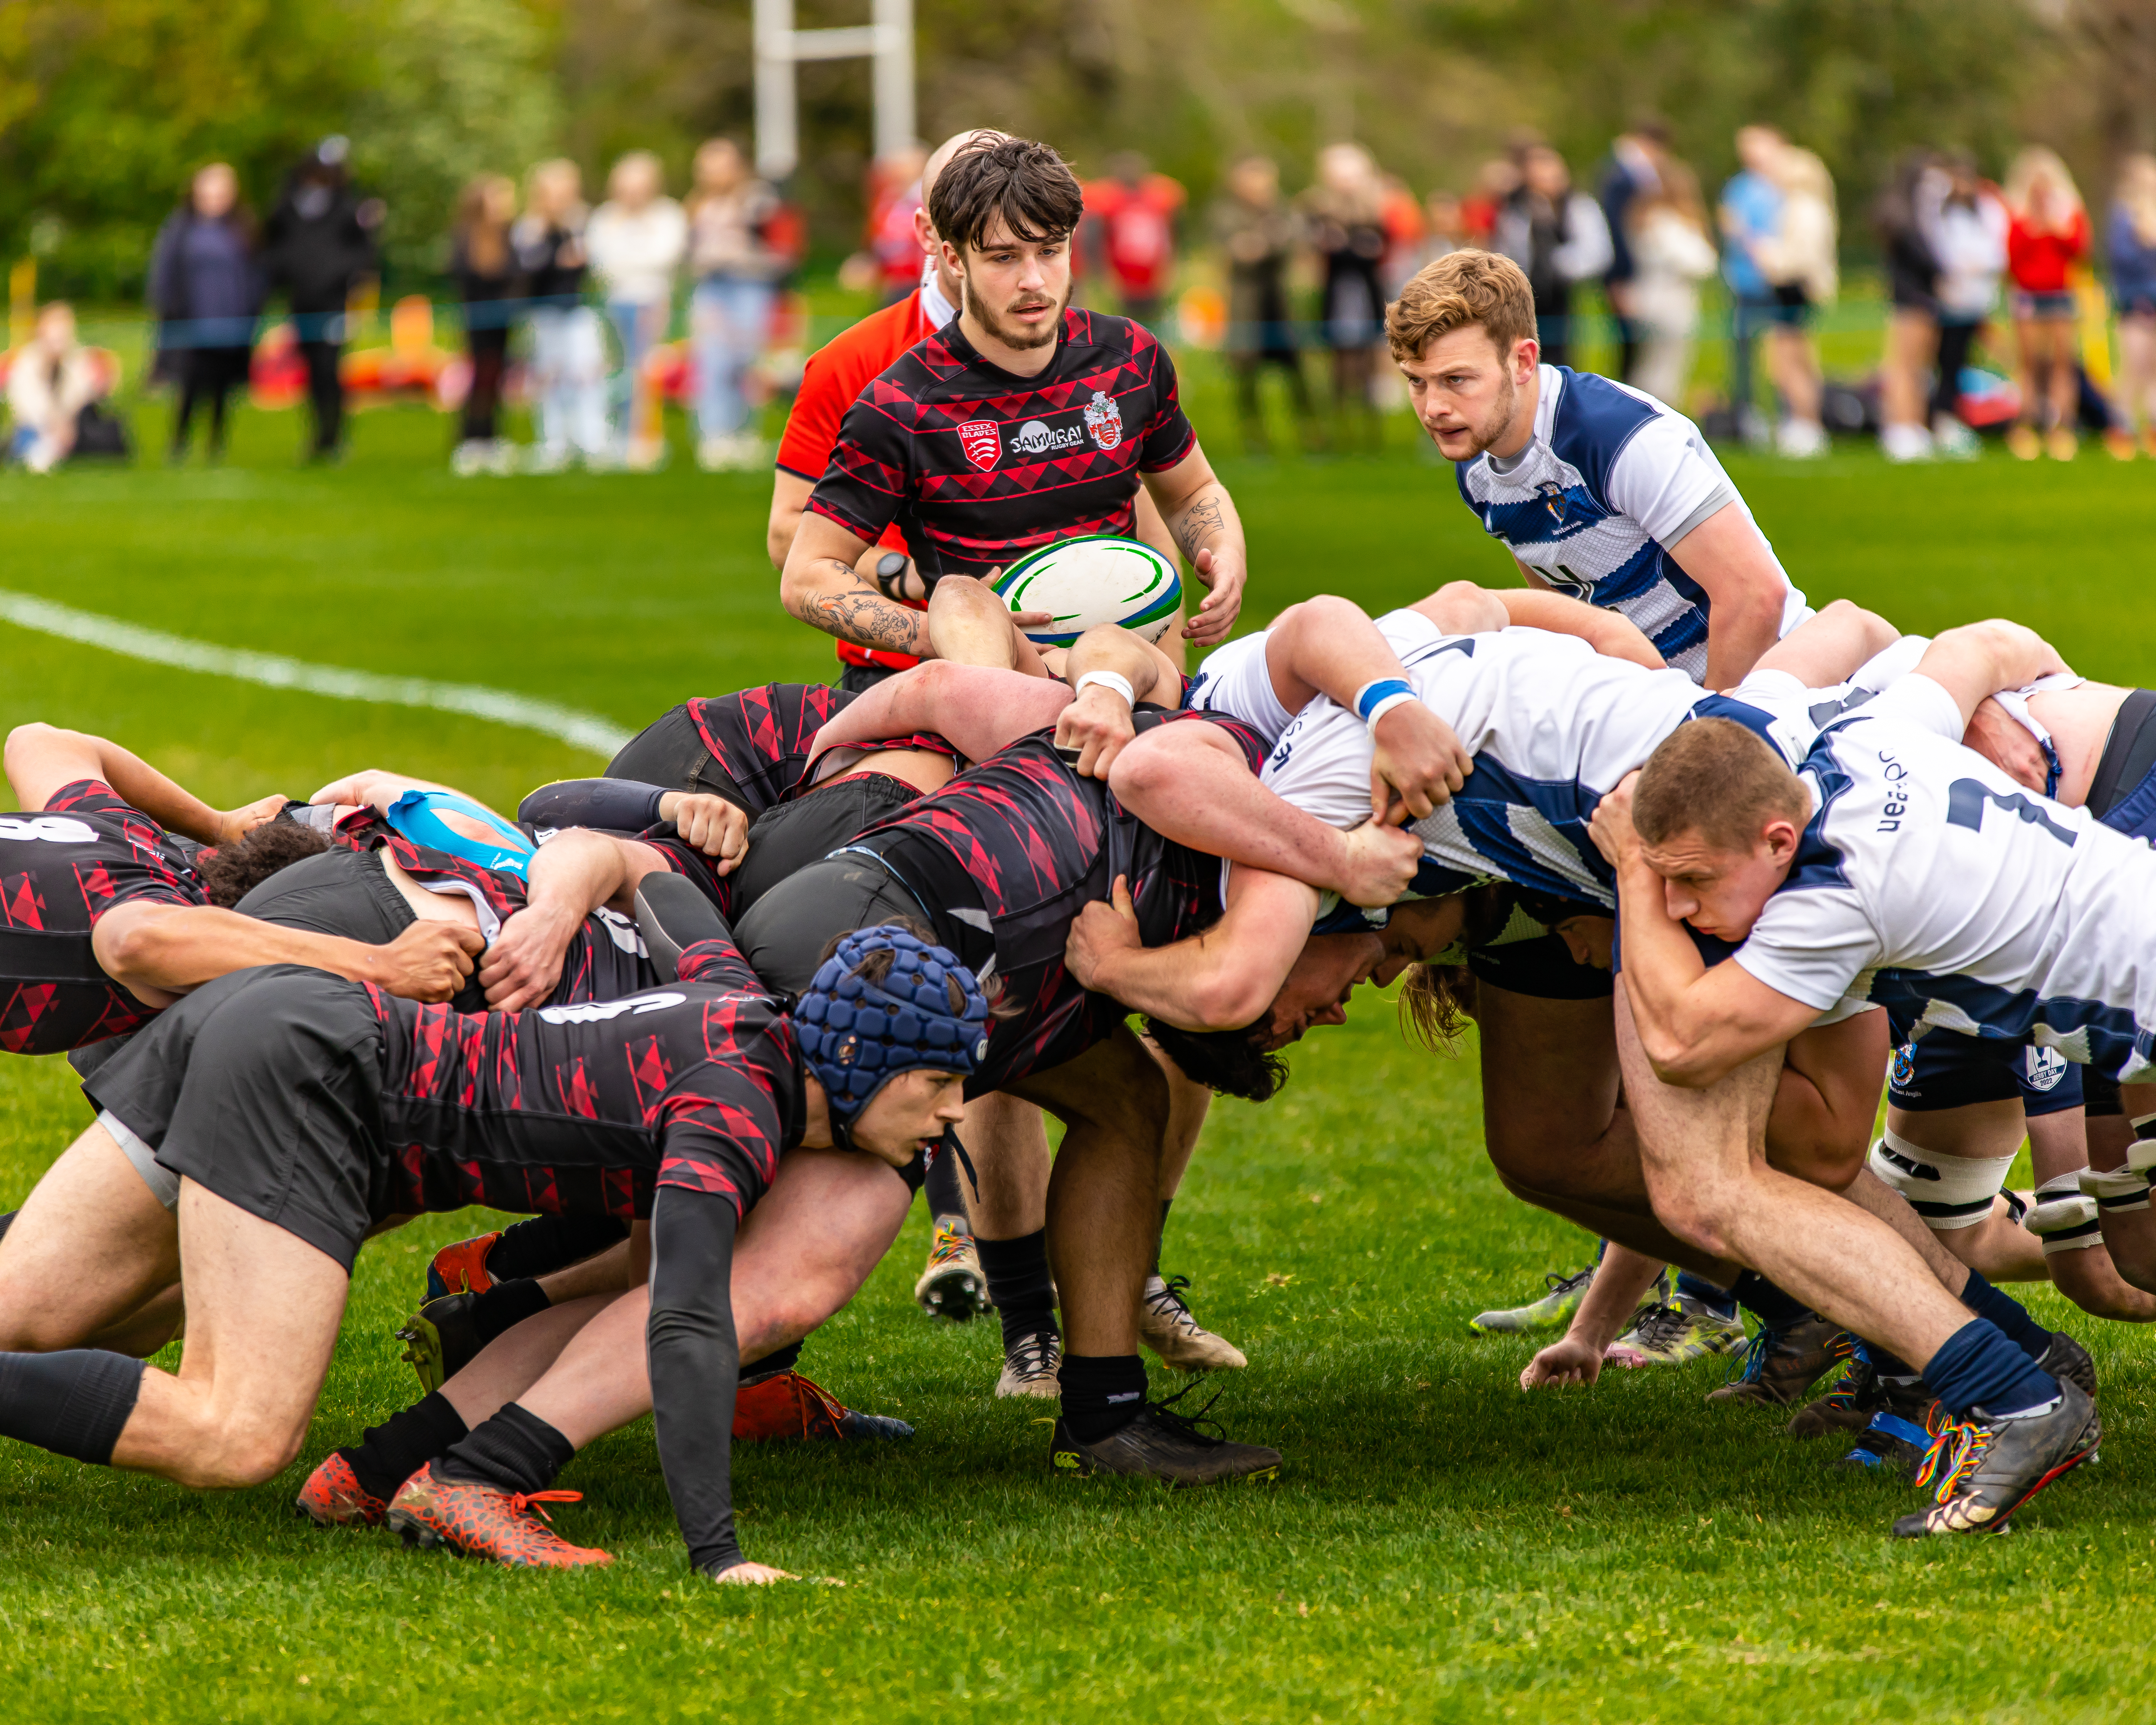 University of Essex Mens Rugby Team in a scrum with the University of East Anglia on Derby Day